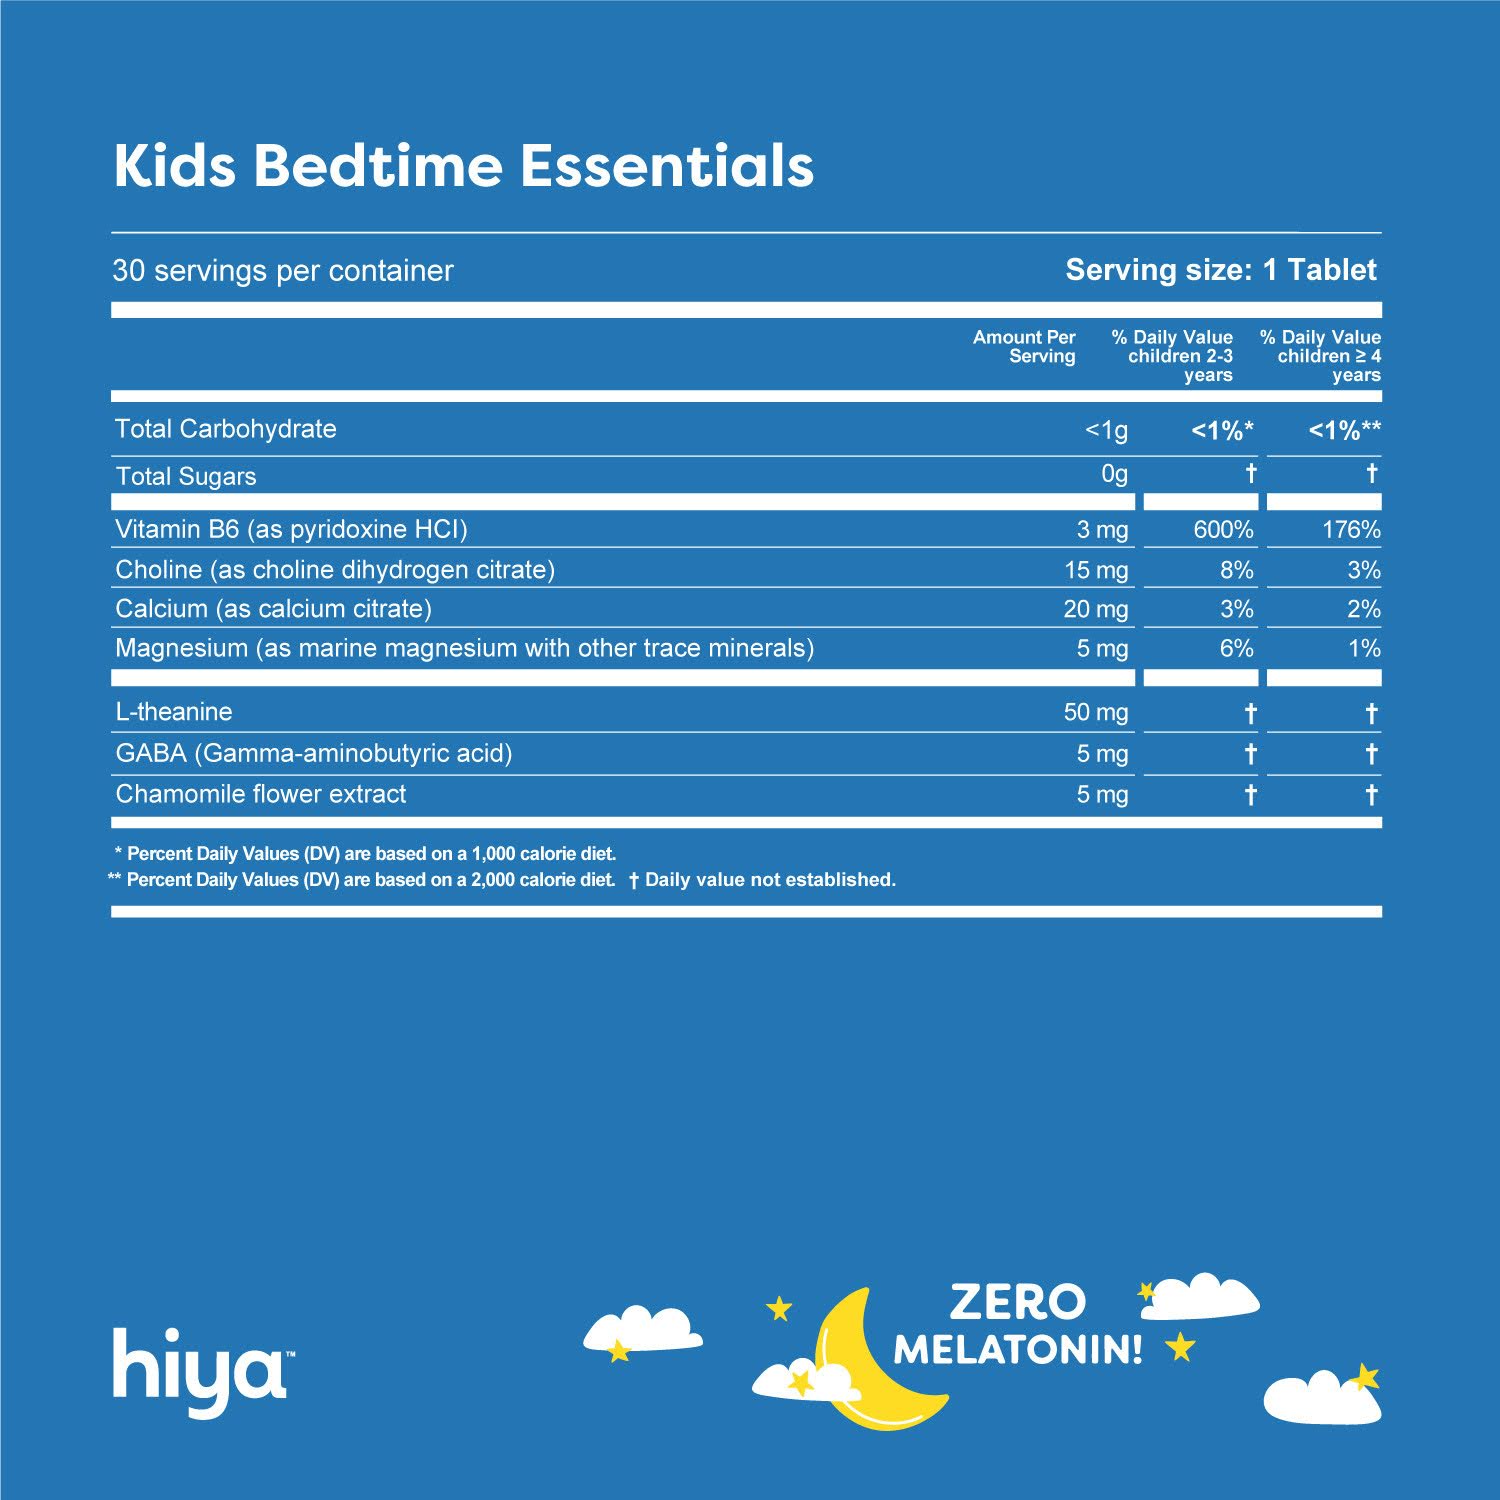 A nutrition label for Hiya's Kids Bedtime Essentials with the text "Zero Melatonin!" at the bottom. Total Carbohydrate and Total Sugars with less than 1 gram each, Vitamin B6 (3 mg), Choline (15 mg), Calcium (20 mg), Magnesium (5 mg), L-Theanine (50 mg), GABA (5 mg), and Chamomile flower extract (5 mg). Vitamin B6 is 600% the Daily Value for children 2-3 years and 176% for children 4 years and older.